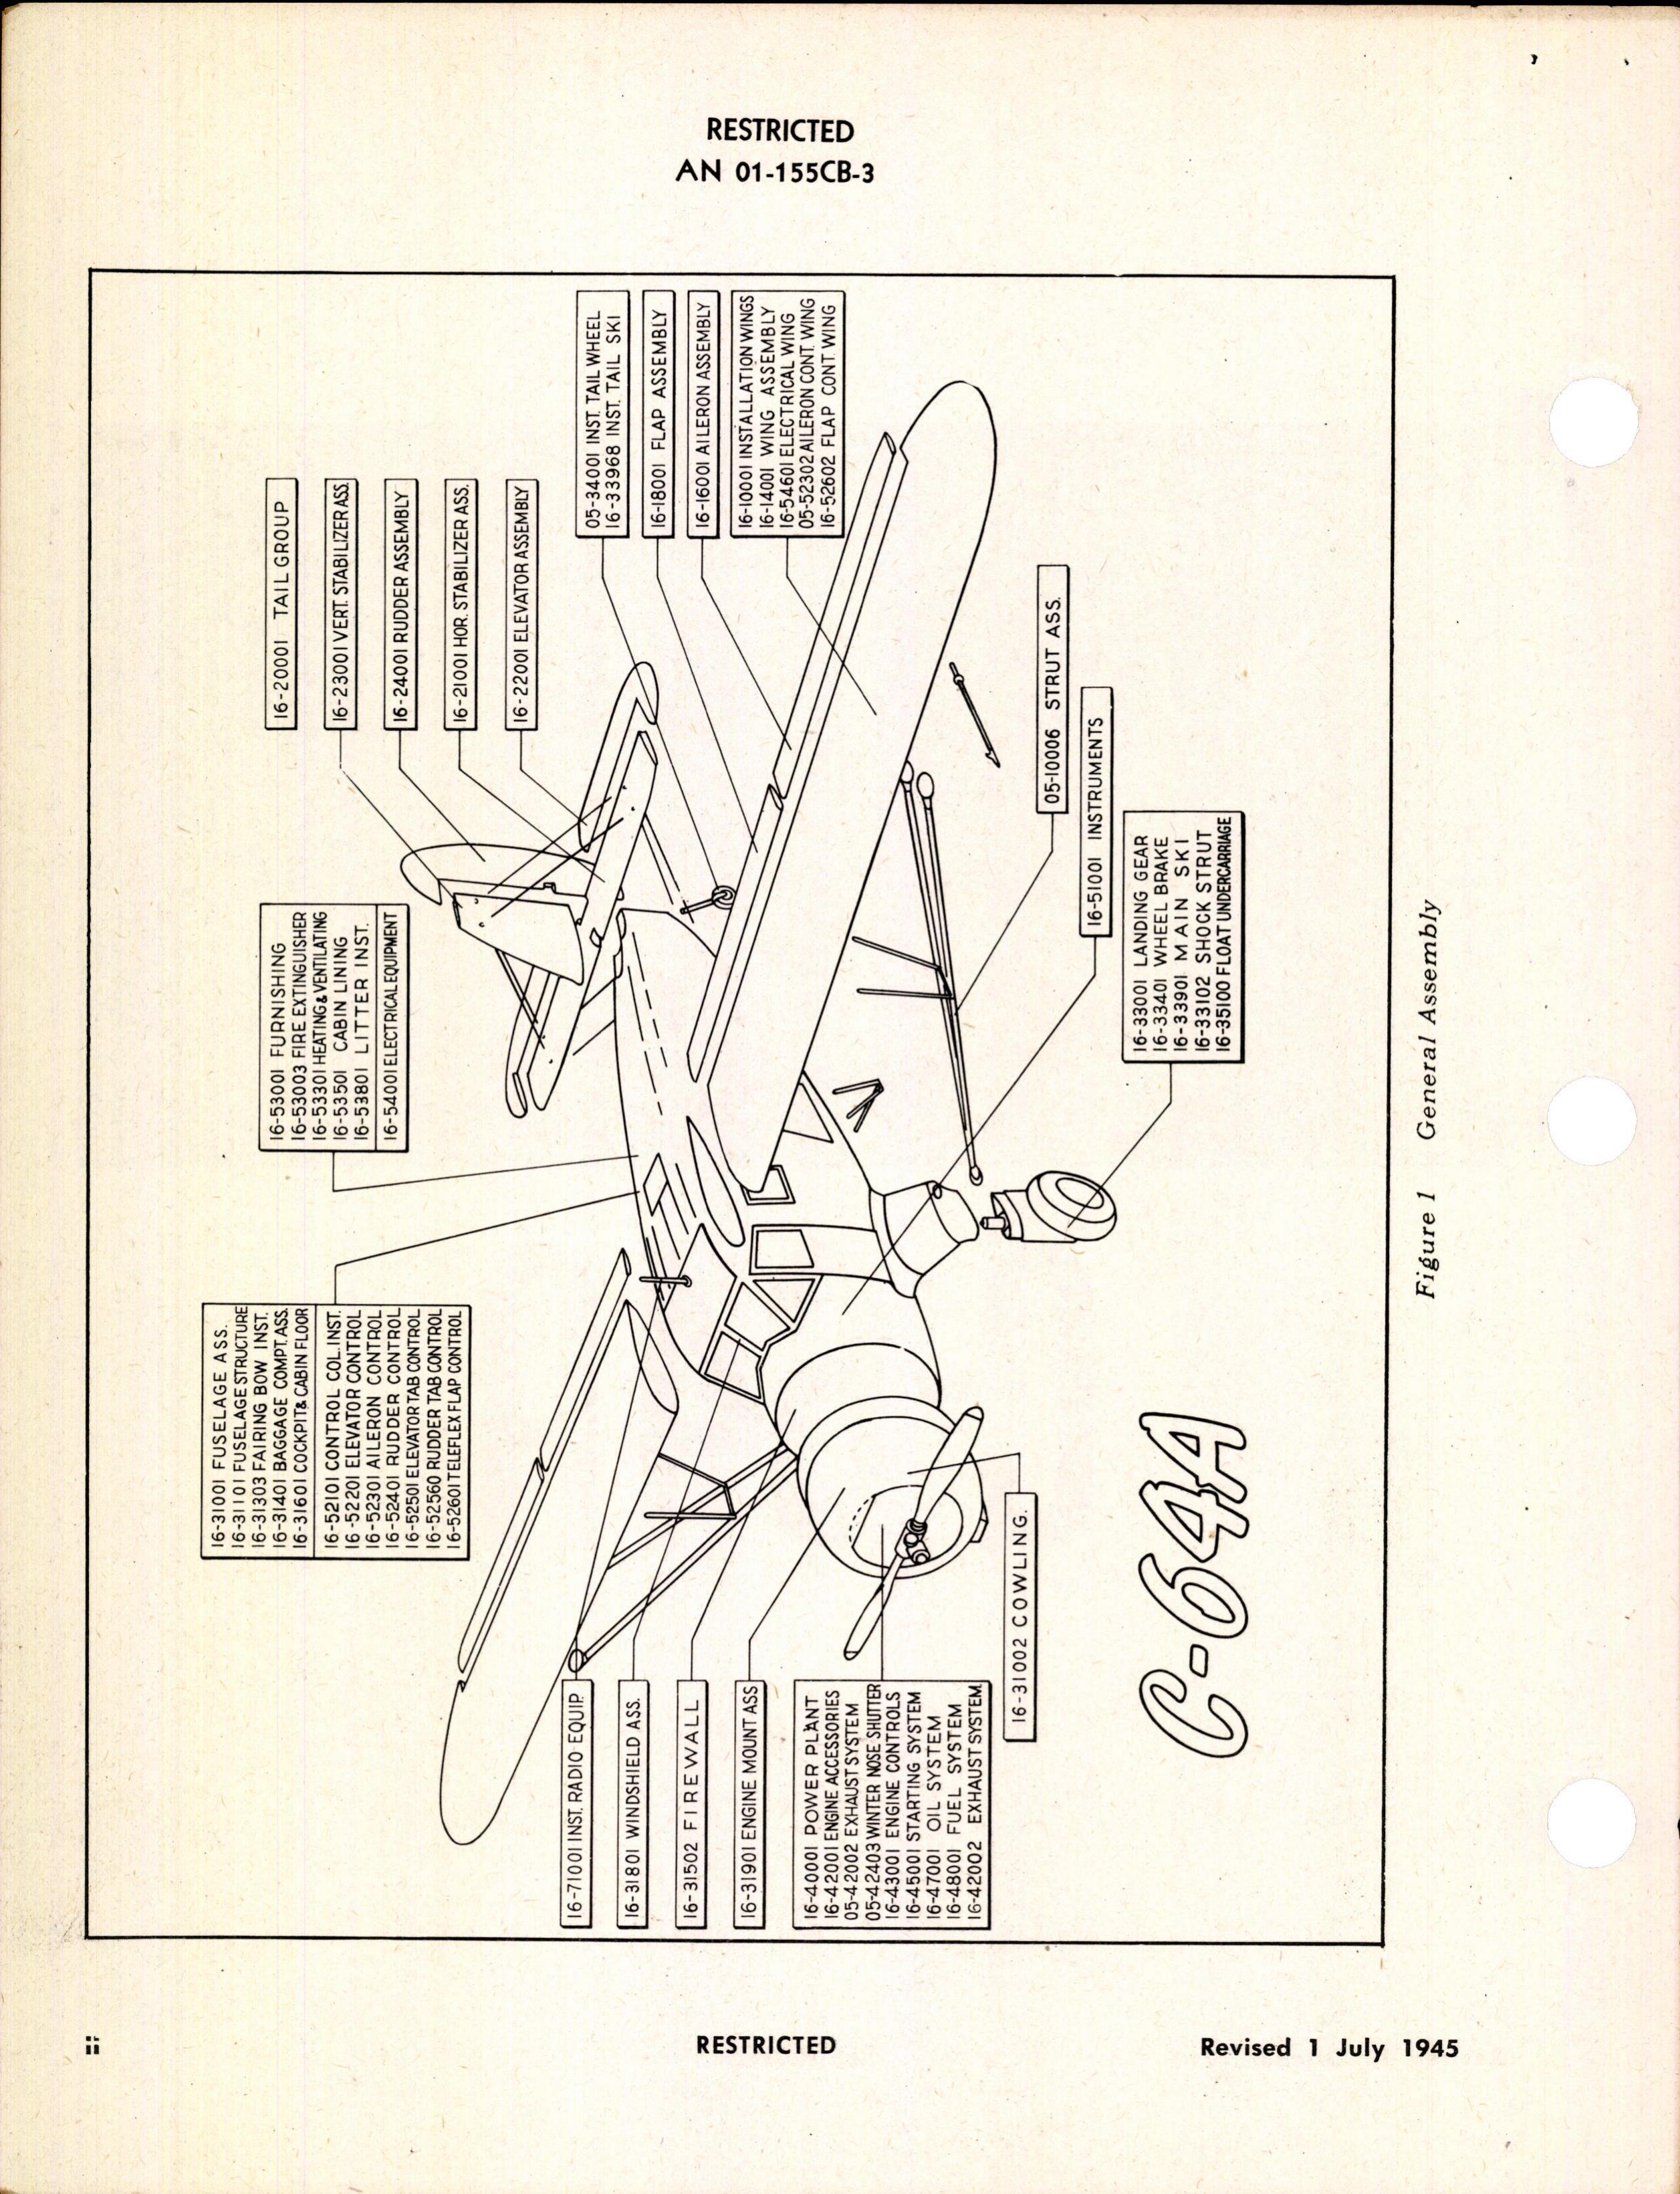 Sample page 6 from AirCorps Library document: Structural Repair Instructions for C-64A Airplanes